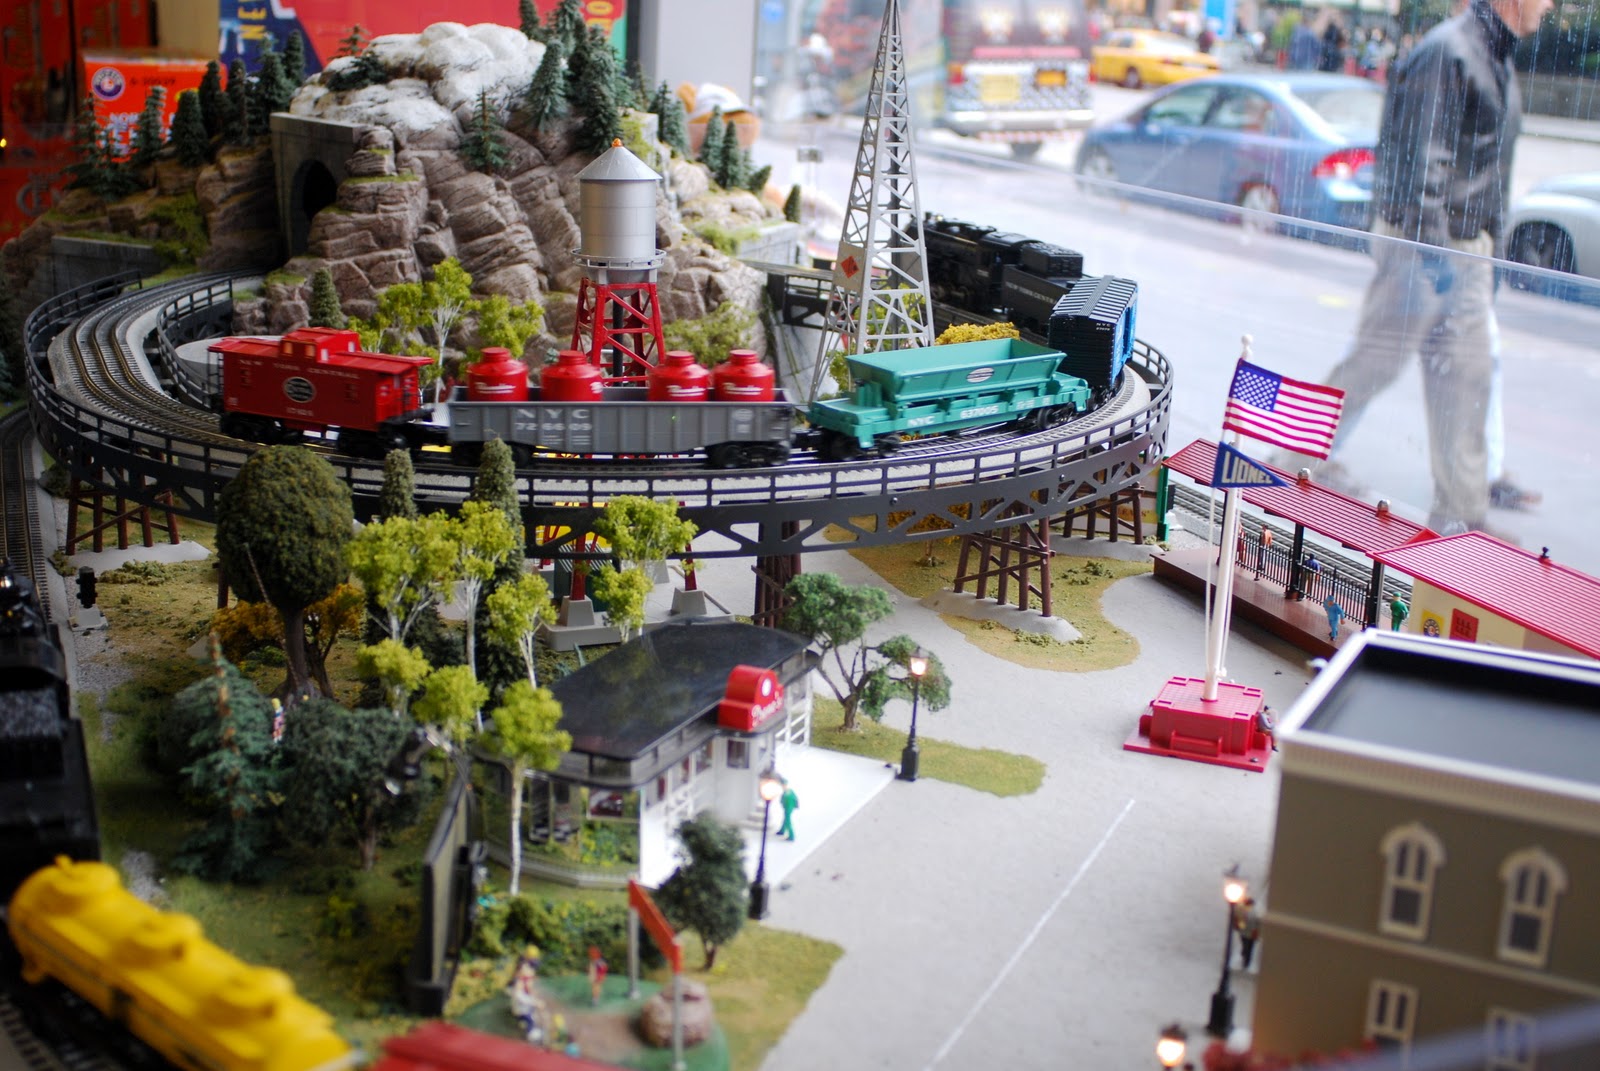 NYC ♥ NYC: Lionel Model Train Holiday Pop-Up Store